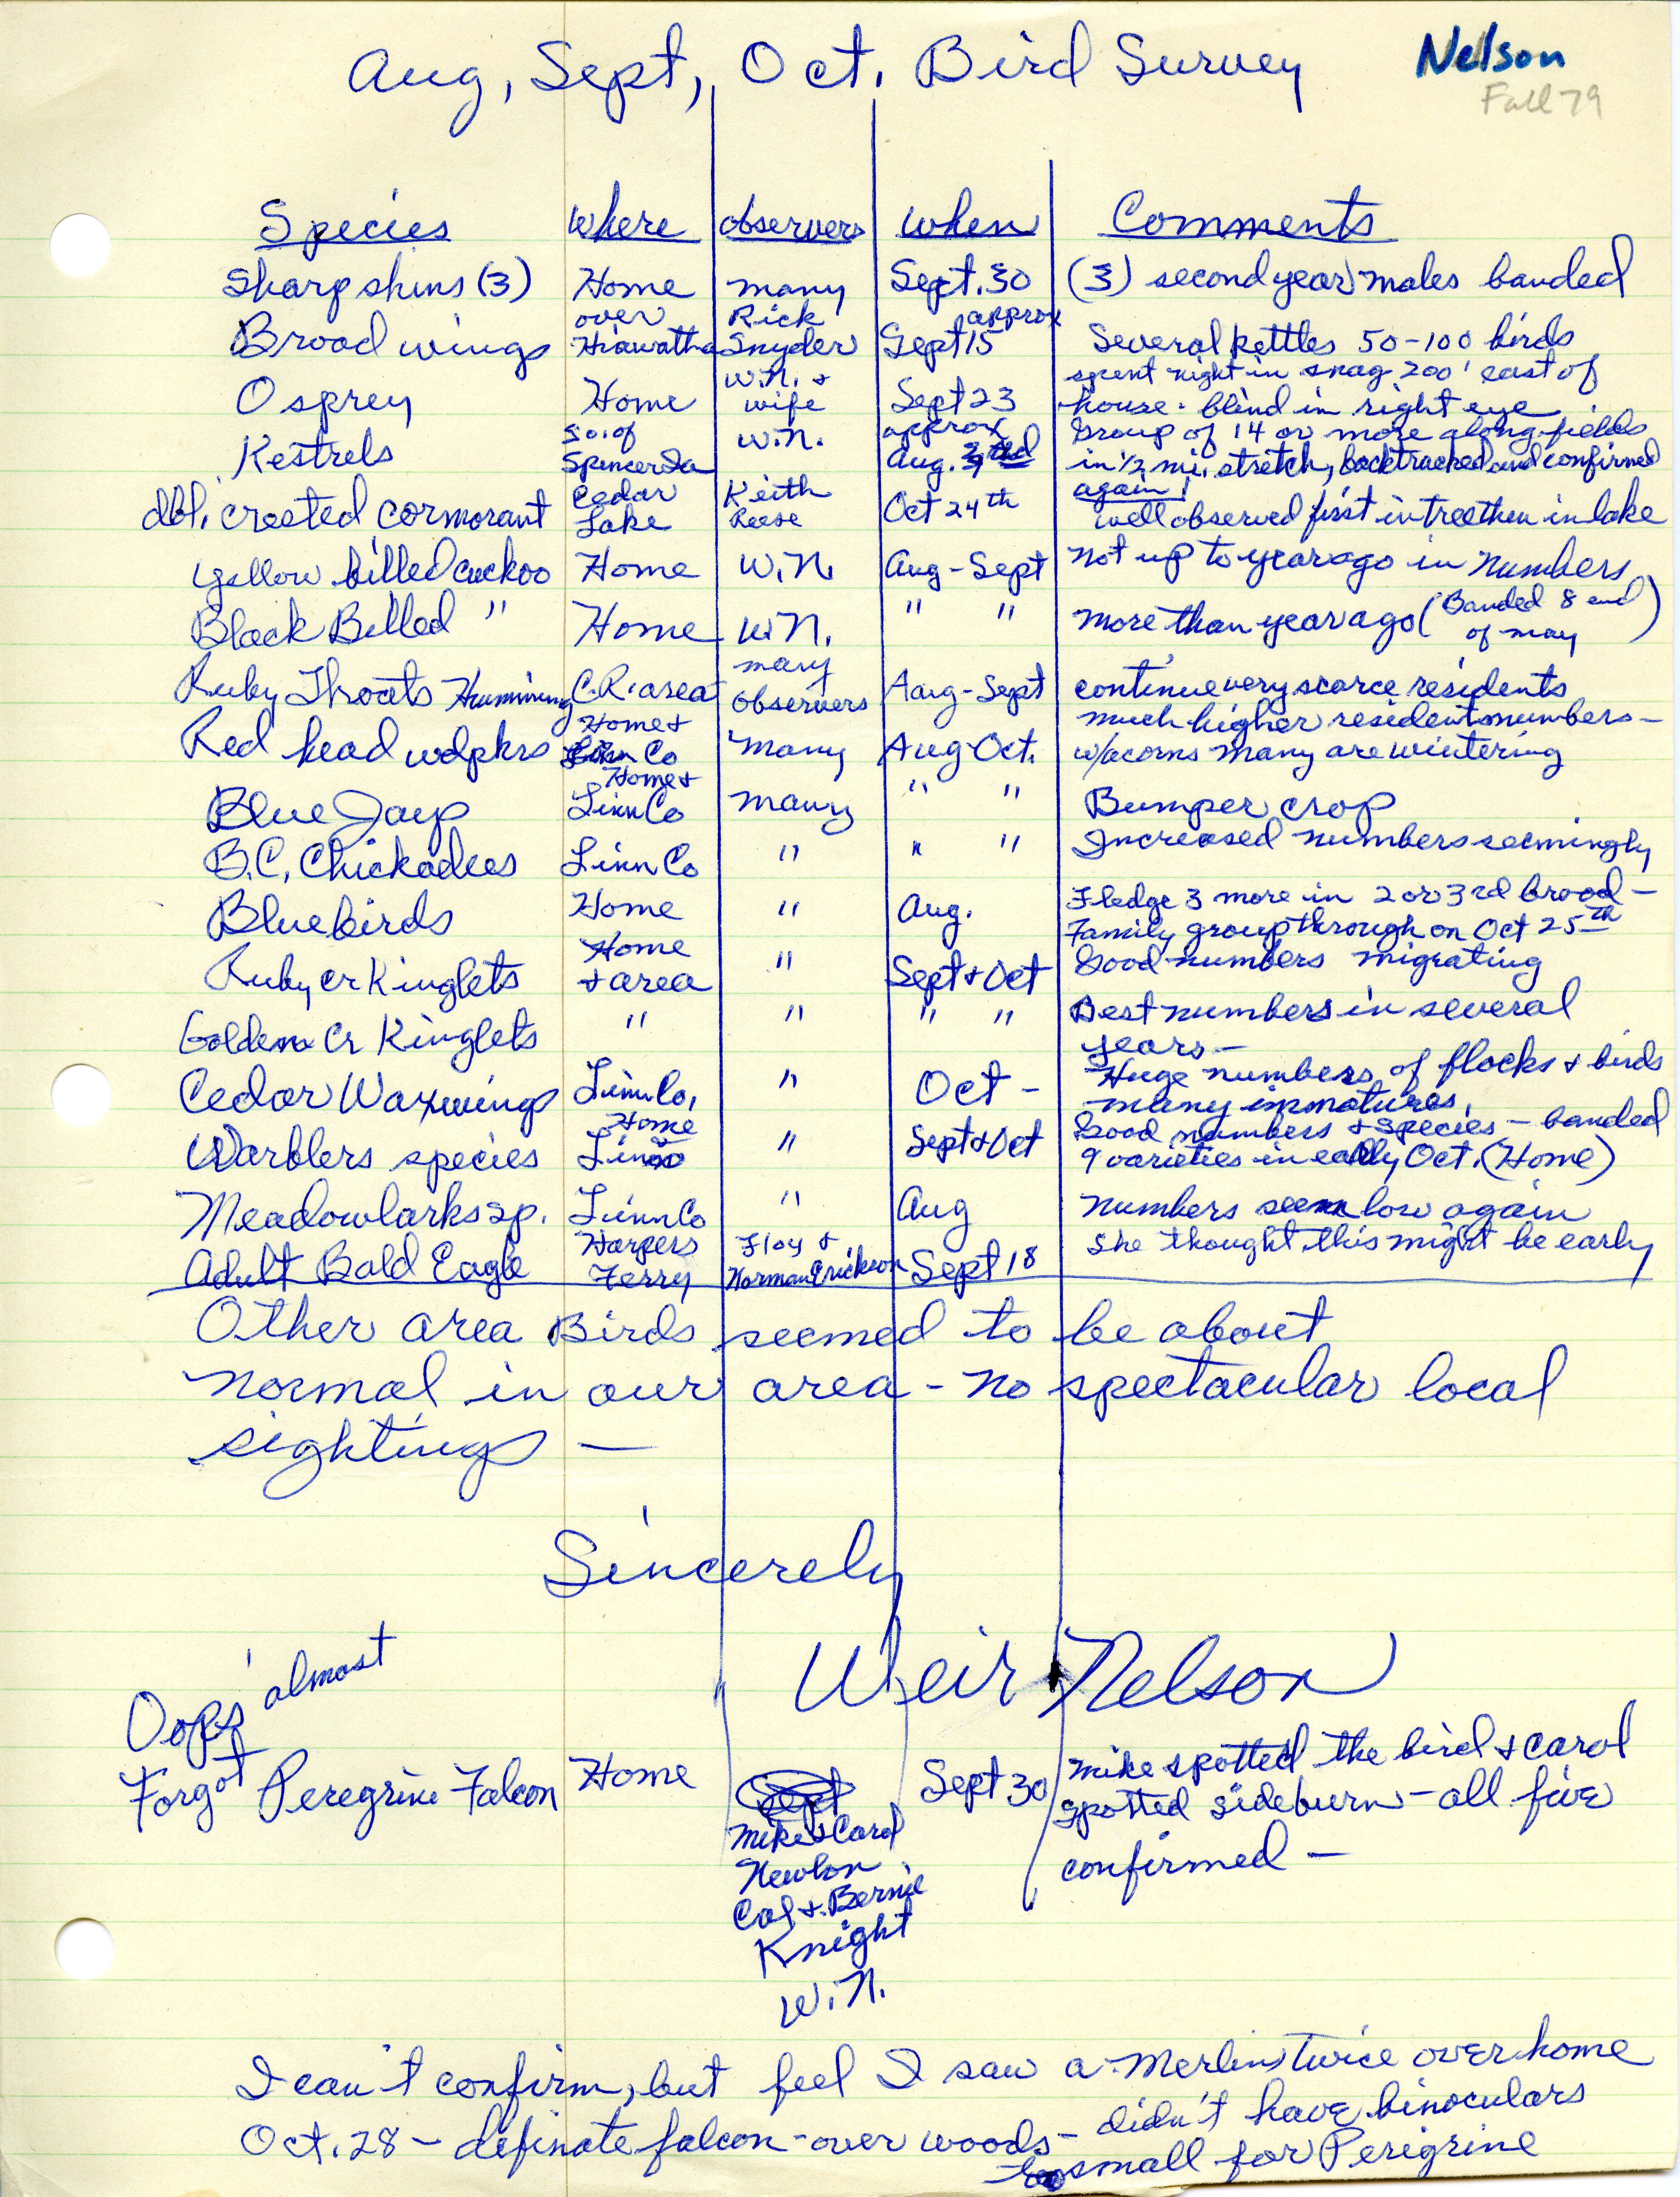 Field notes contributed by Weir Nelson, fall 1979